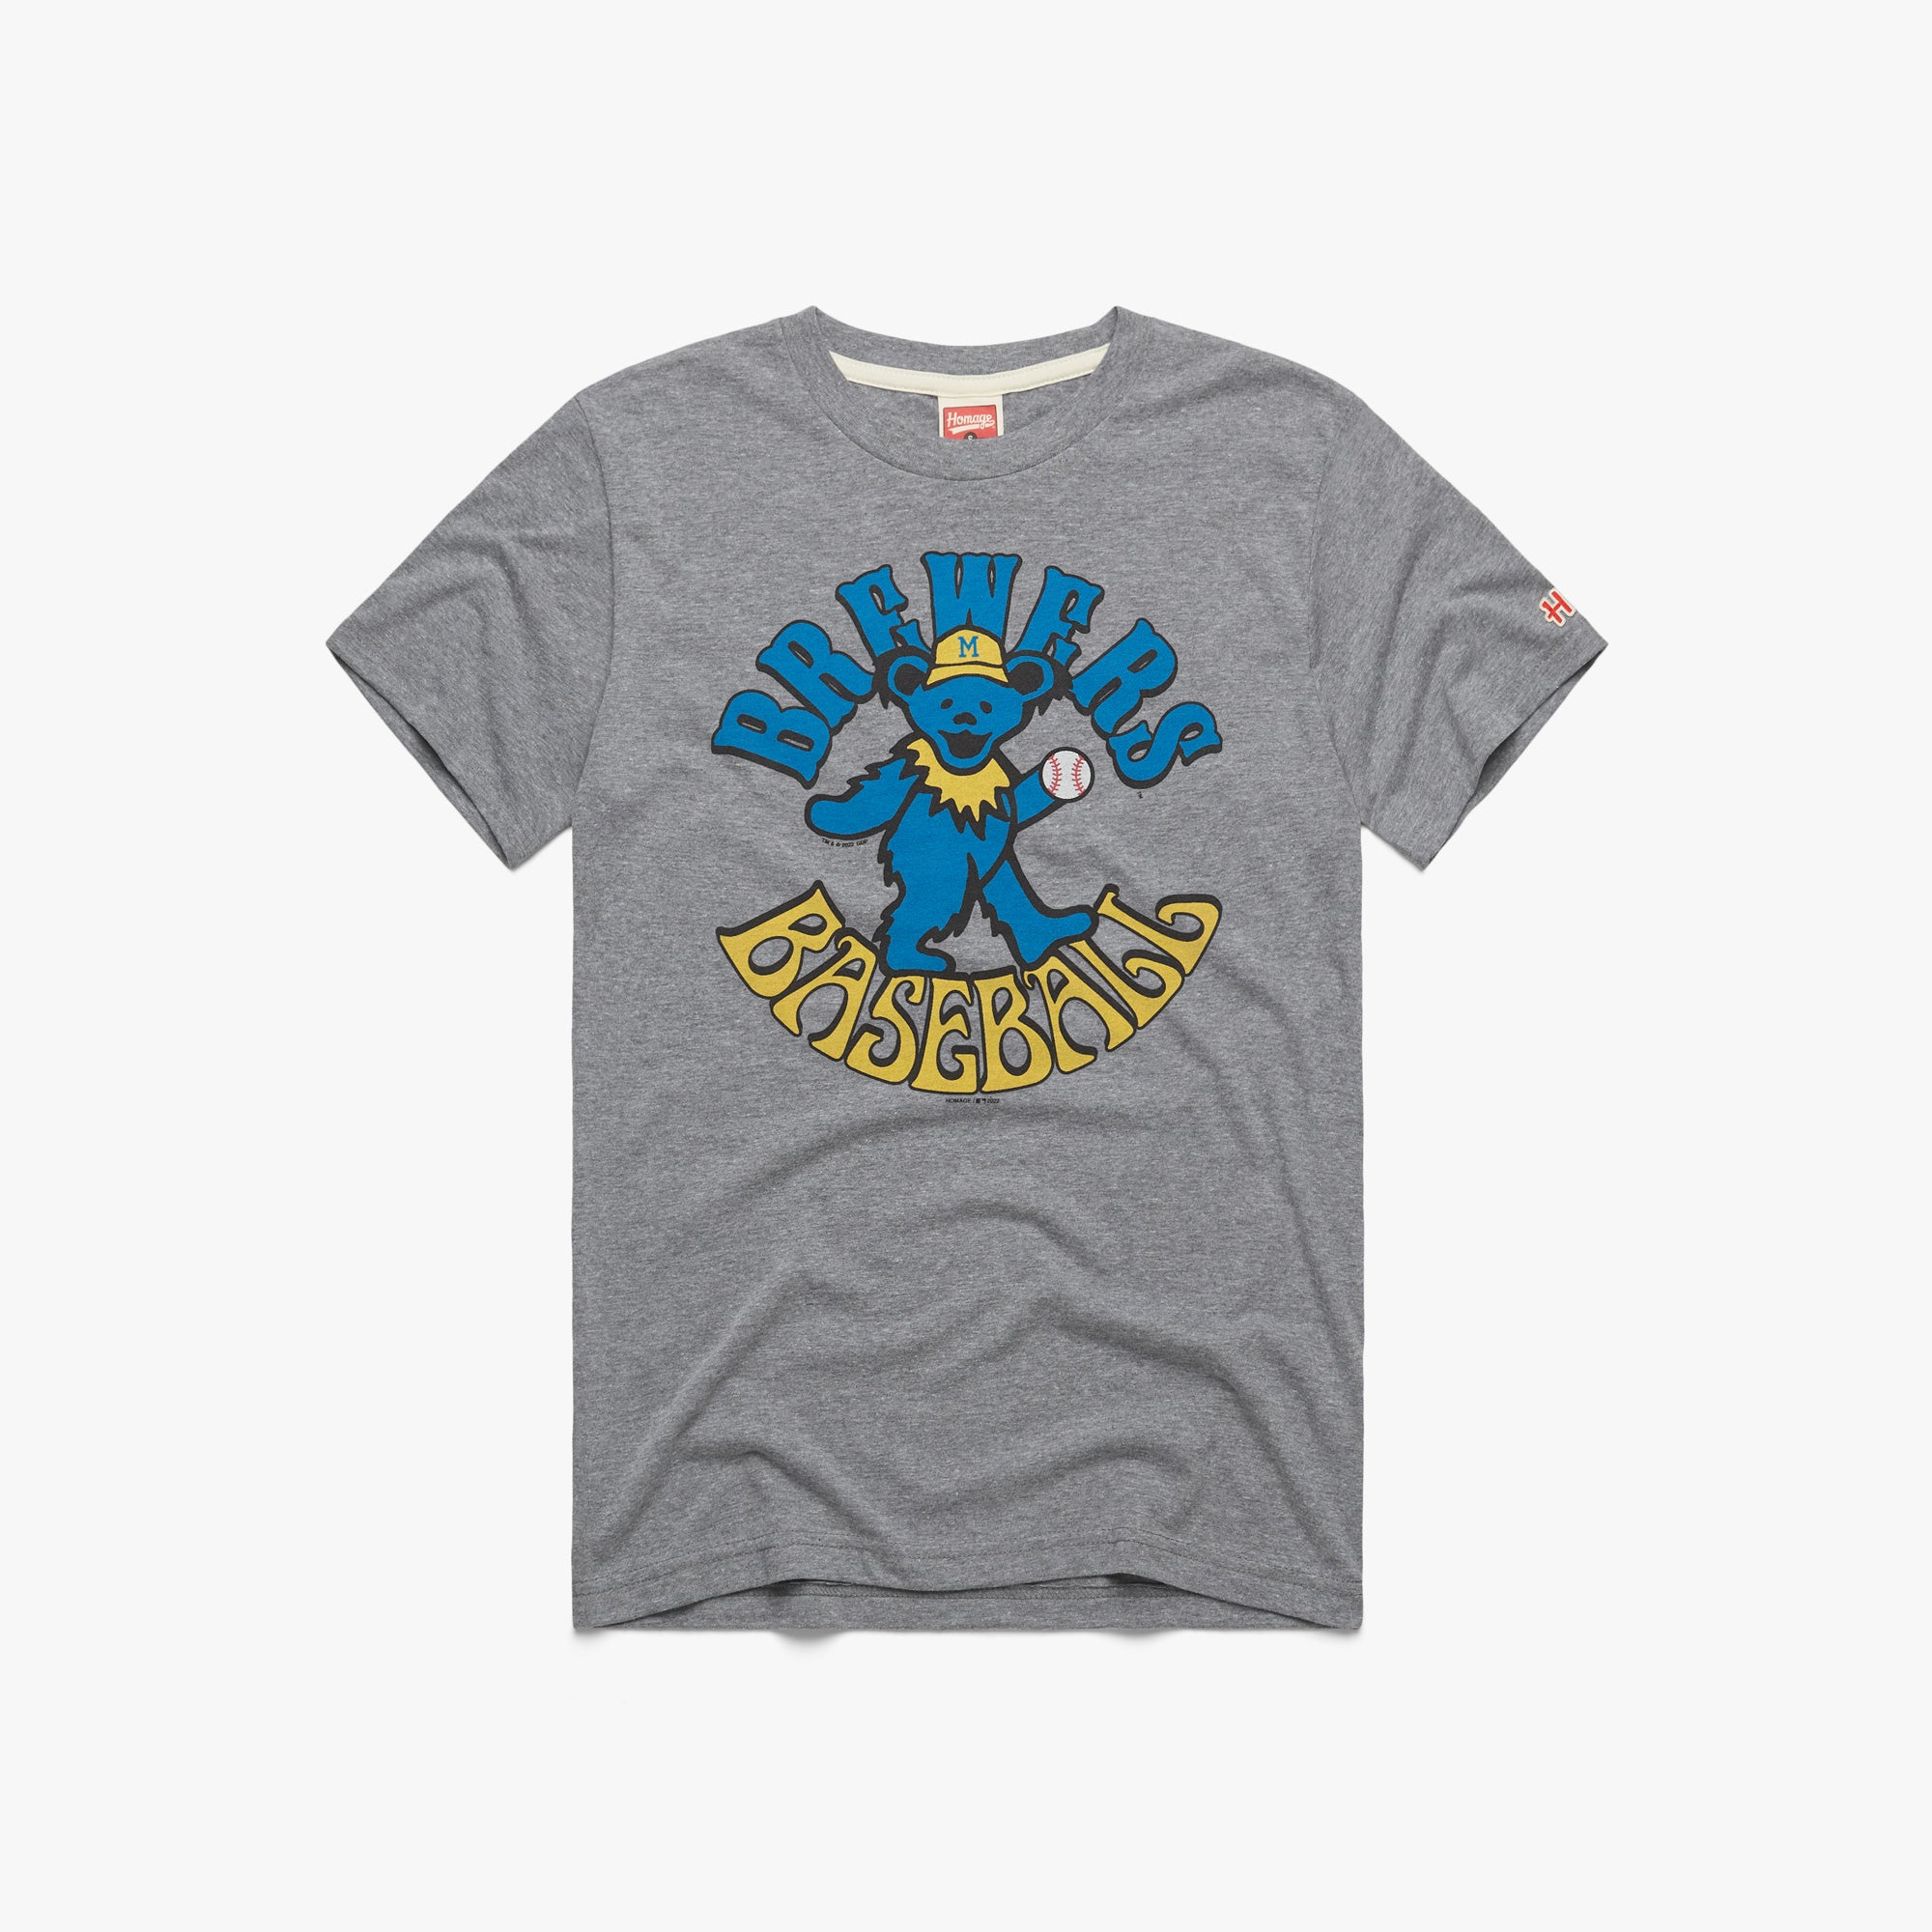 Brewers Roll Out The Barrel T-Shirt from Homage. | Gold | Vintage Apparel from Homage.